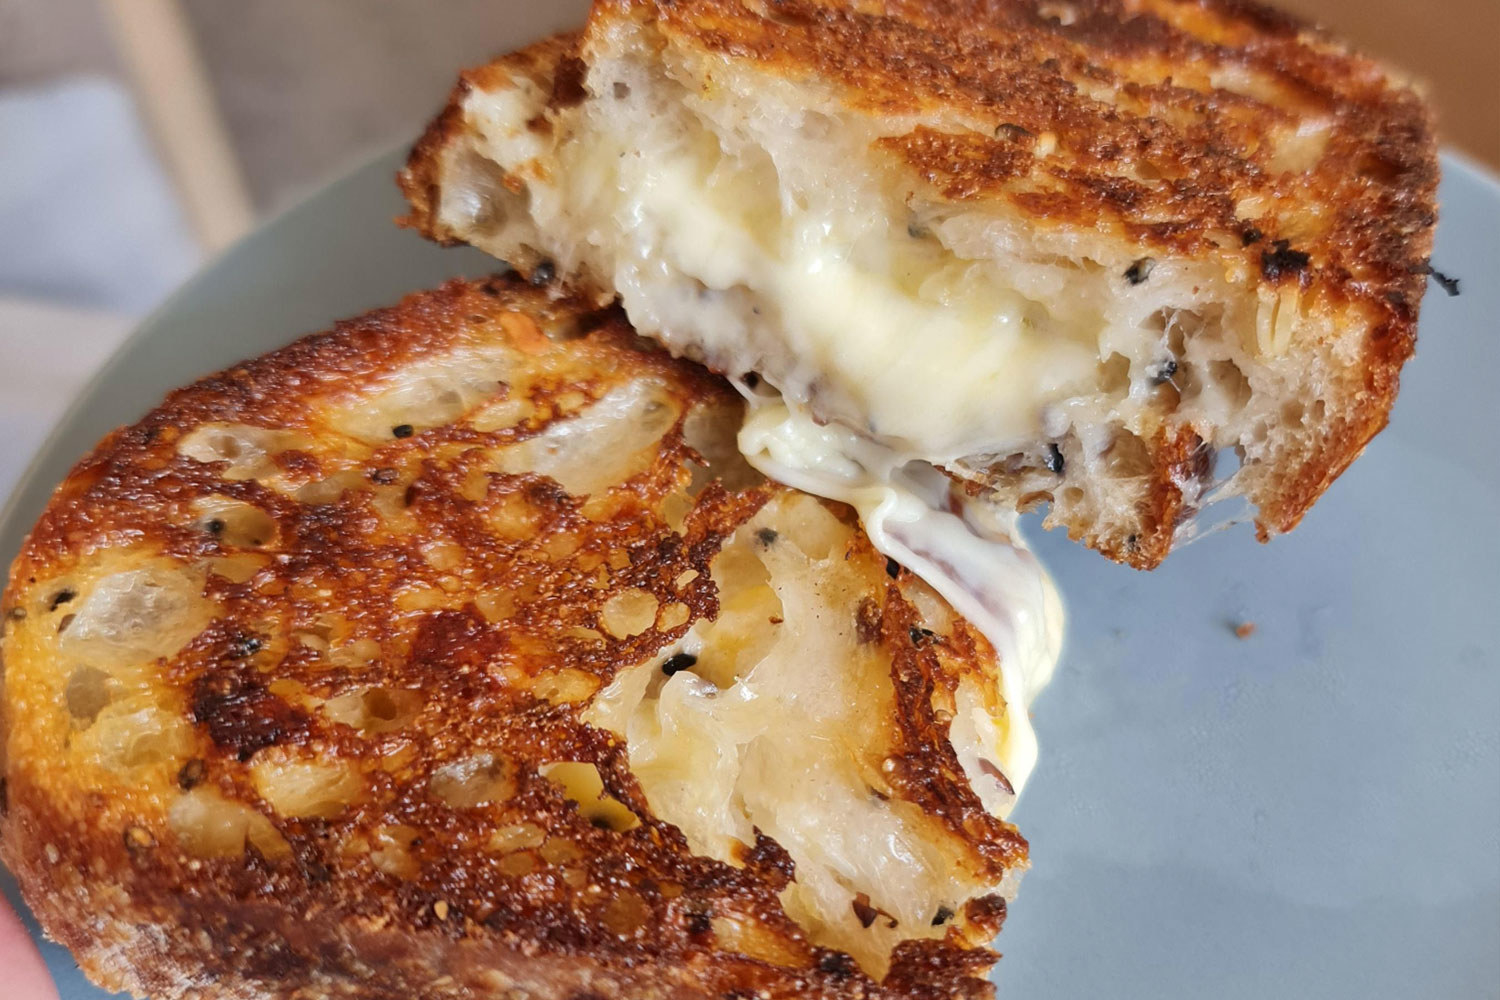 A grilled cheese sandwich on sourdough bread